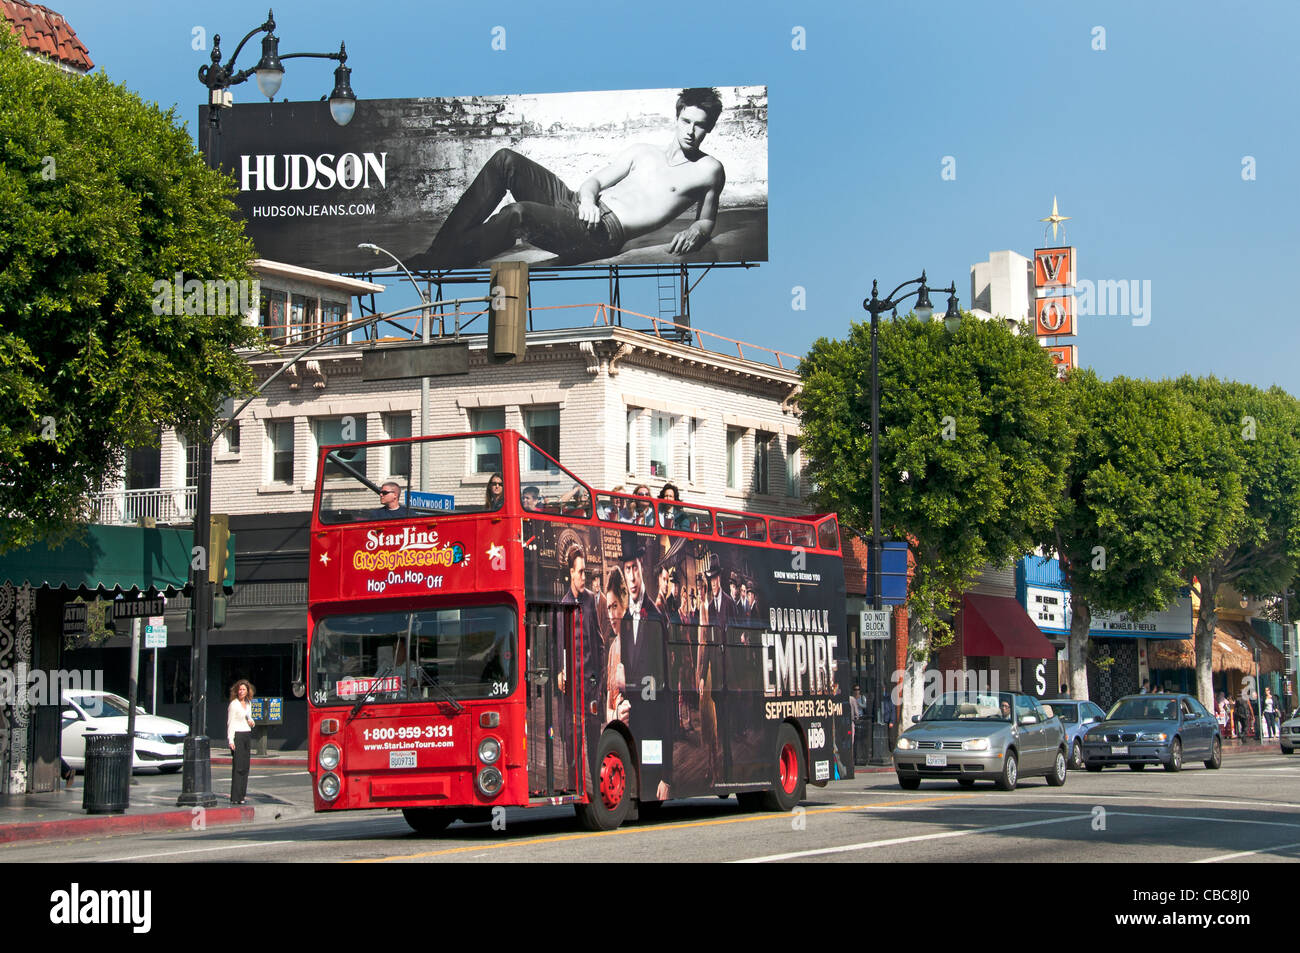 Hollywood Boulevard Hudson California United States of America USA Américain Town City Banque D'Images